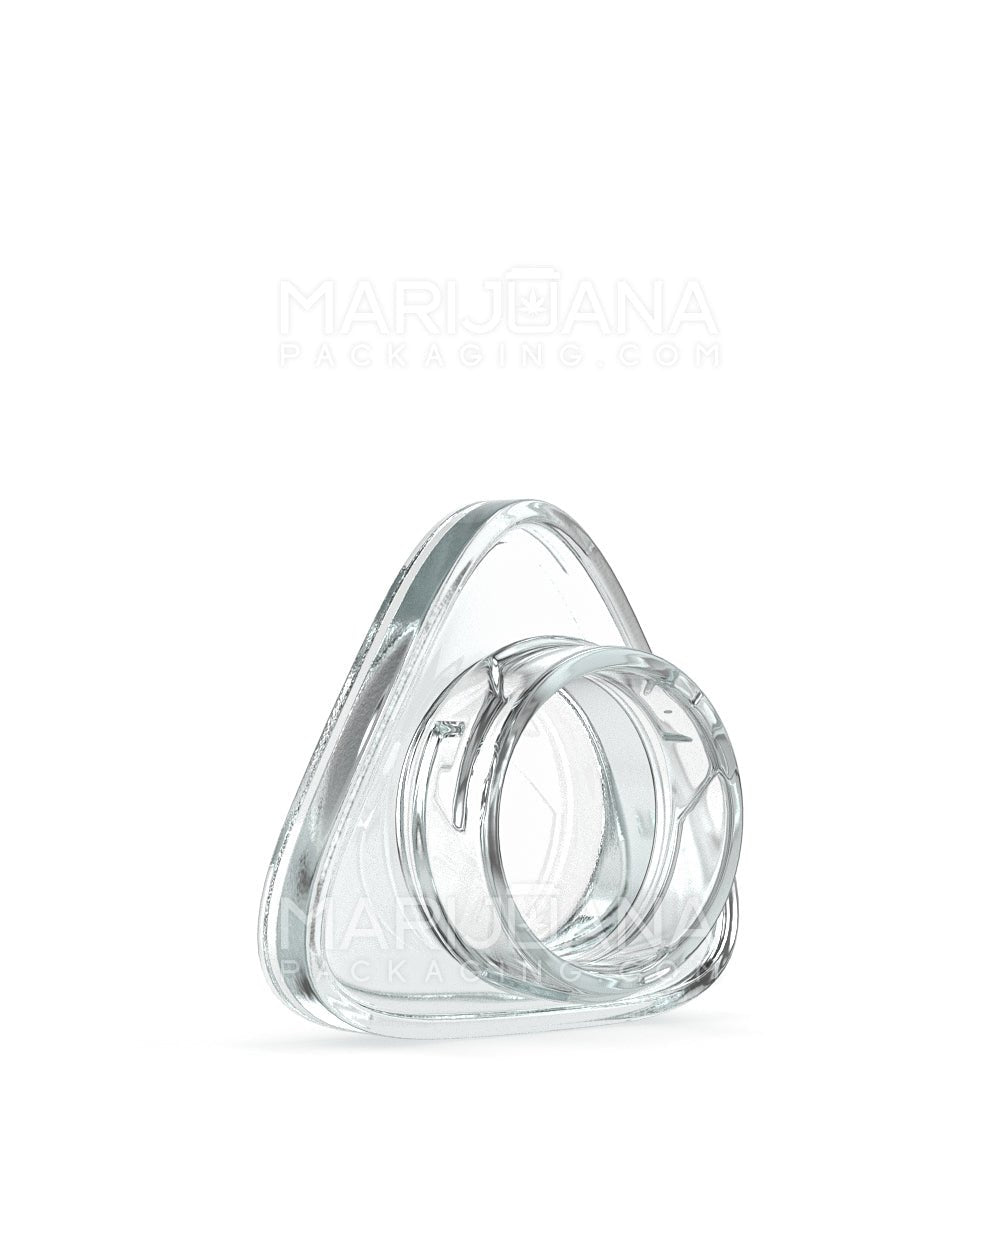 Child Resistant | Clear Glass Triangle Concentrate Jar w/ Black Cap | 24mm - 5mL - 240 Count - 2